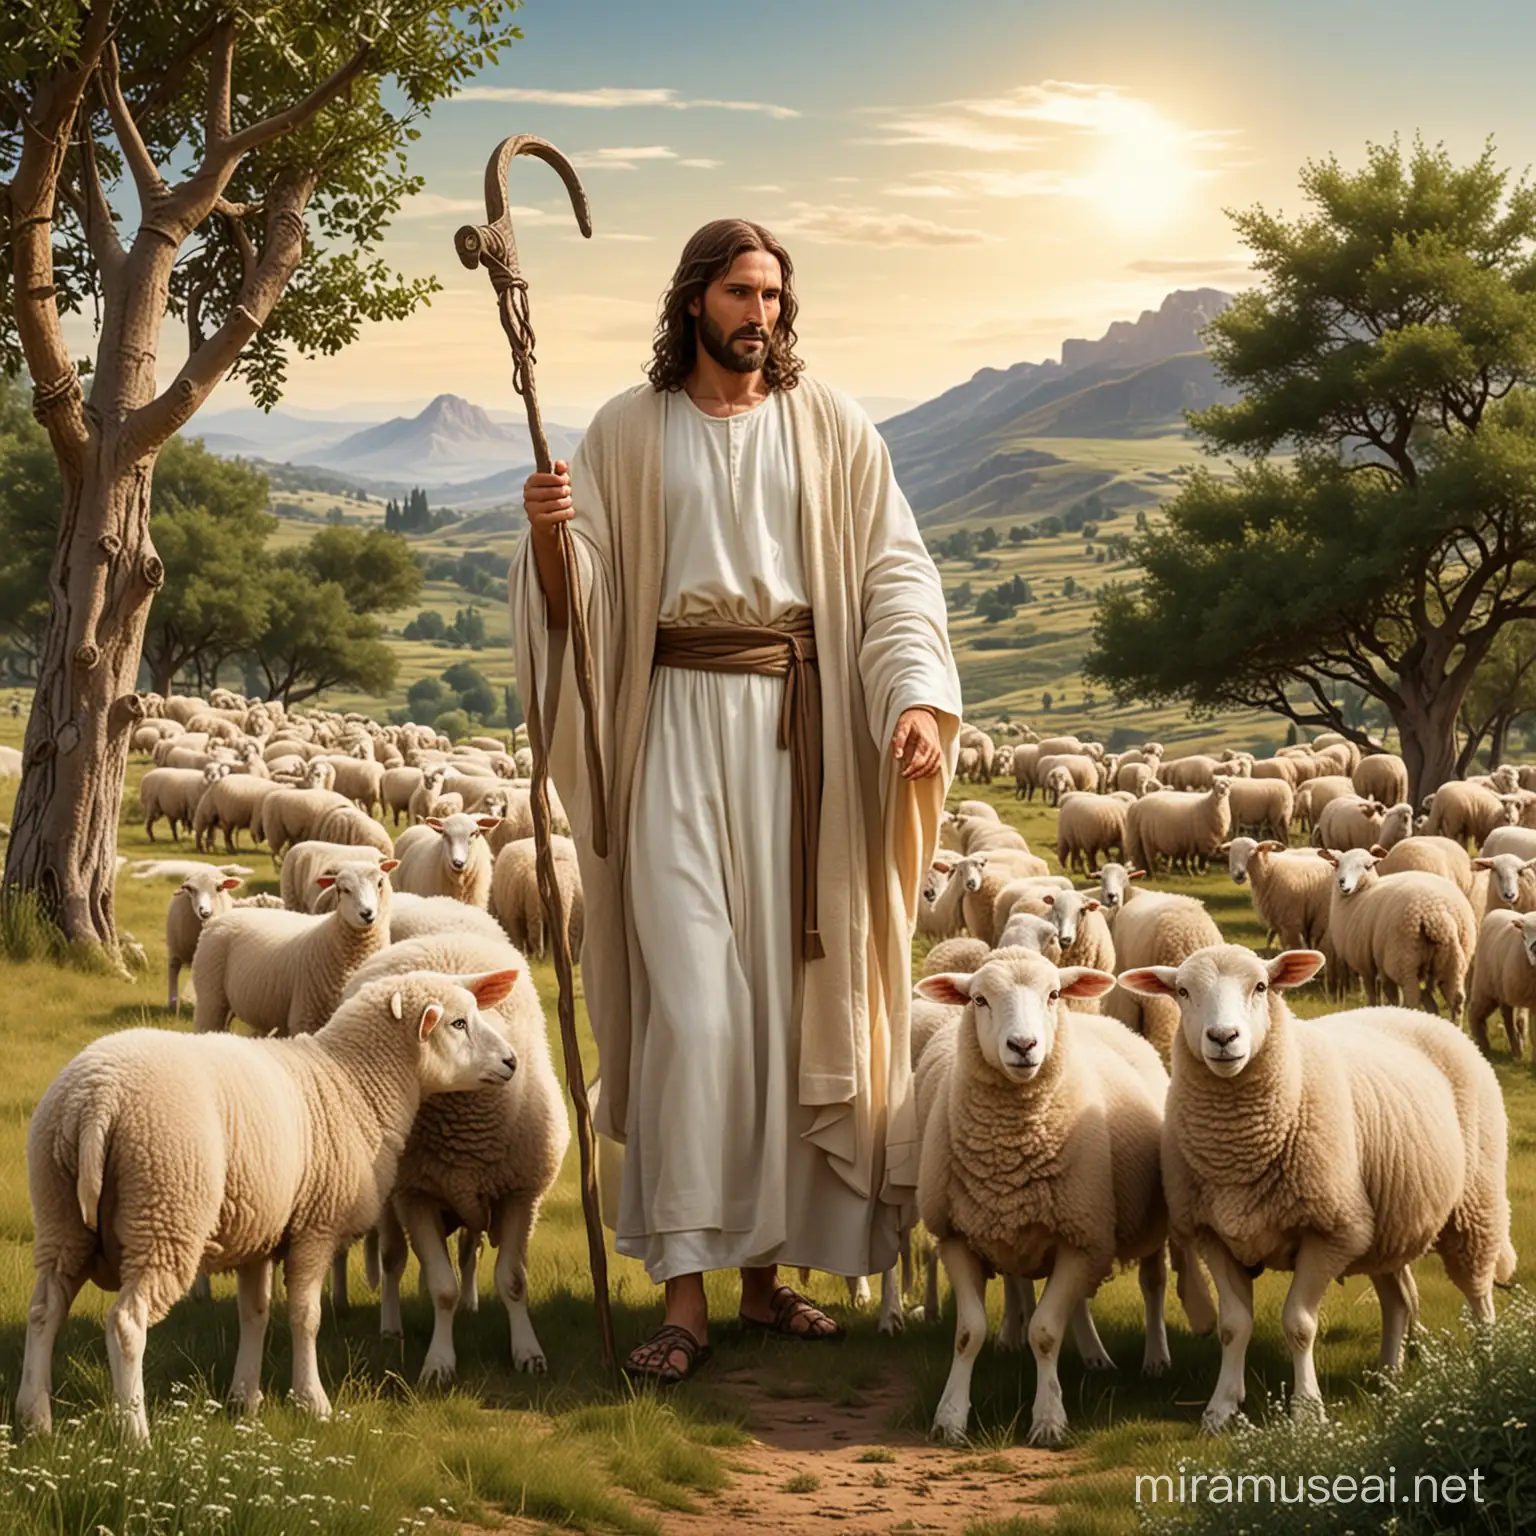 vector jesus-christ standing with a shepherd's crook with 3 sheep around him in the bush